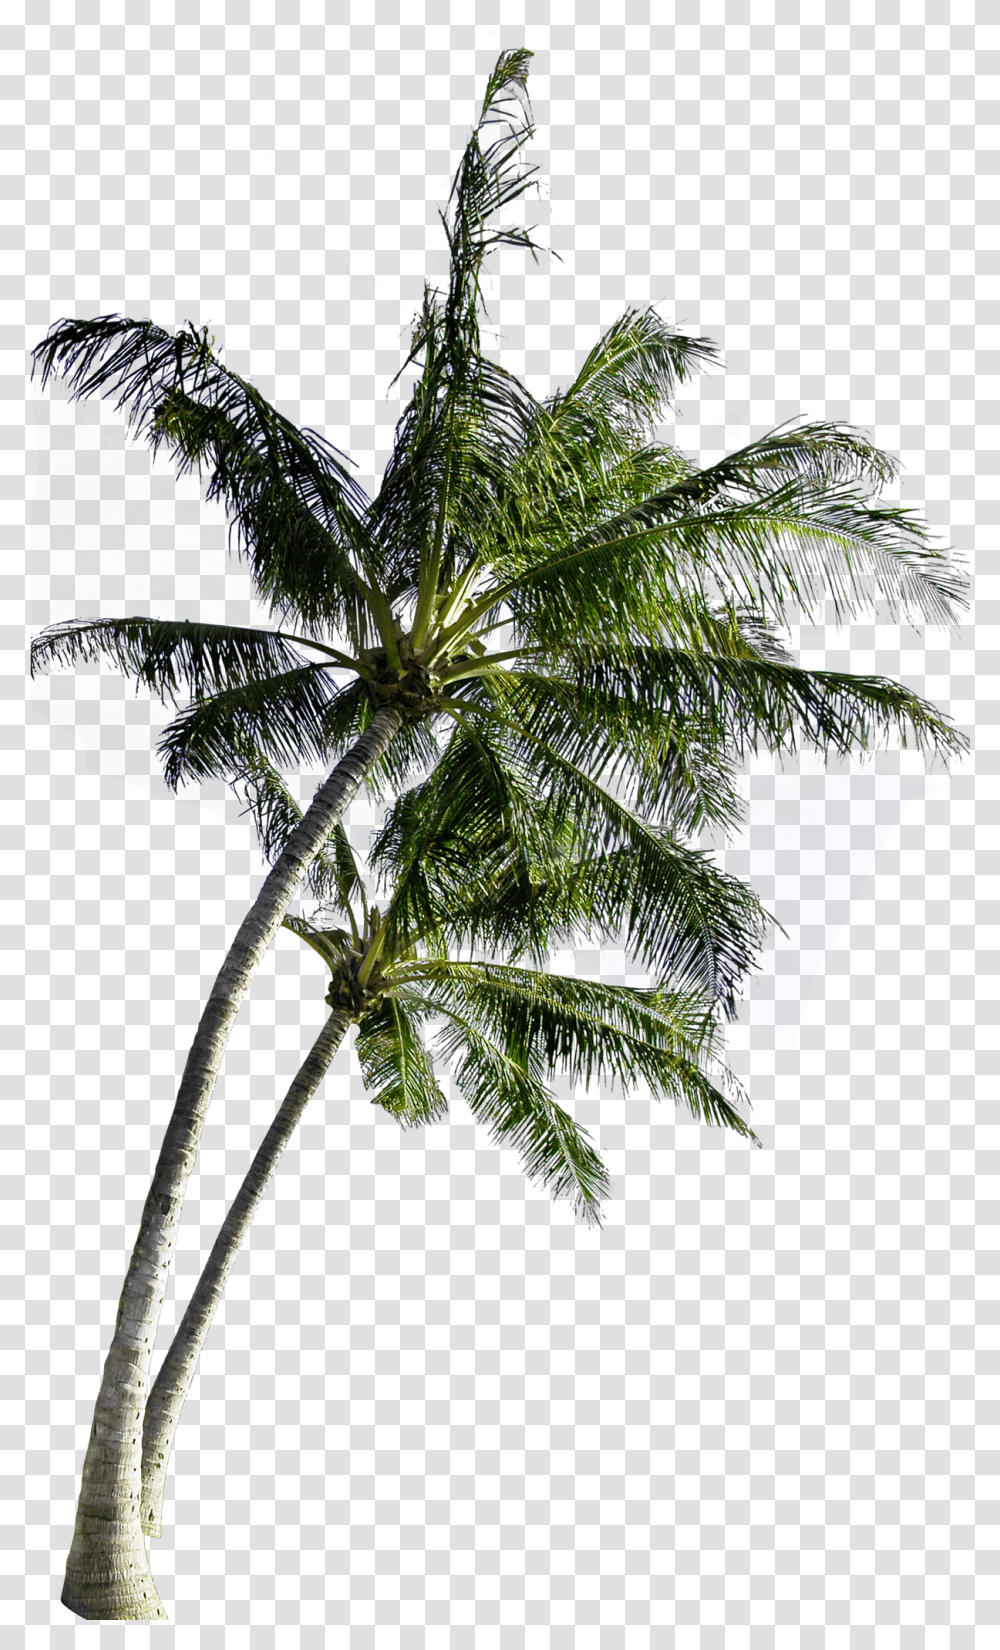 Download Coconut Computer Tree File Free Image Coconut Tree, Palm Tree, Plant, Leaf, Tropical Transparent Png